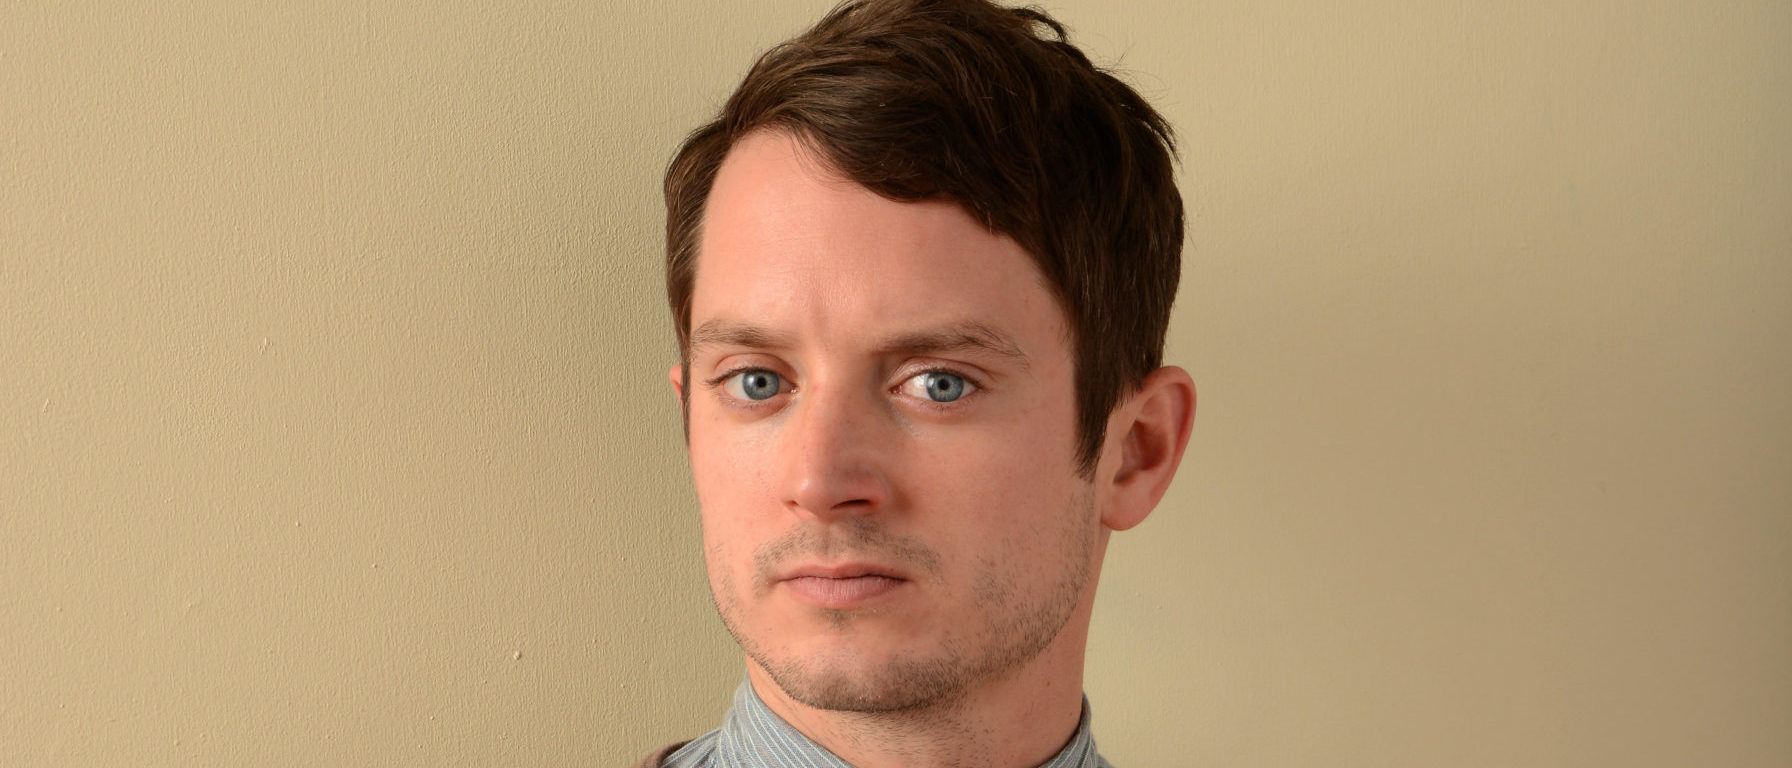 Elijah Wood 'Surprised' By New Lord of the Rings Movies